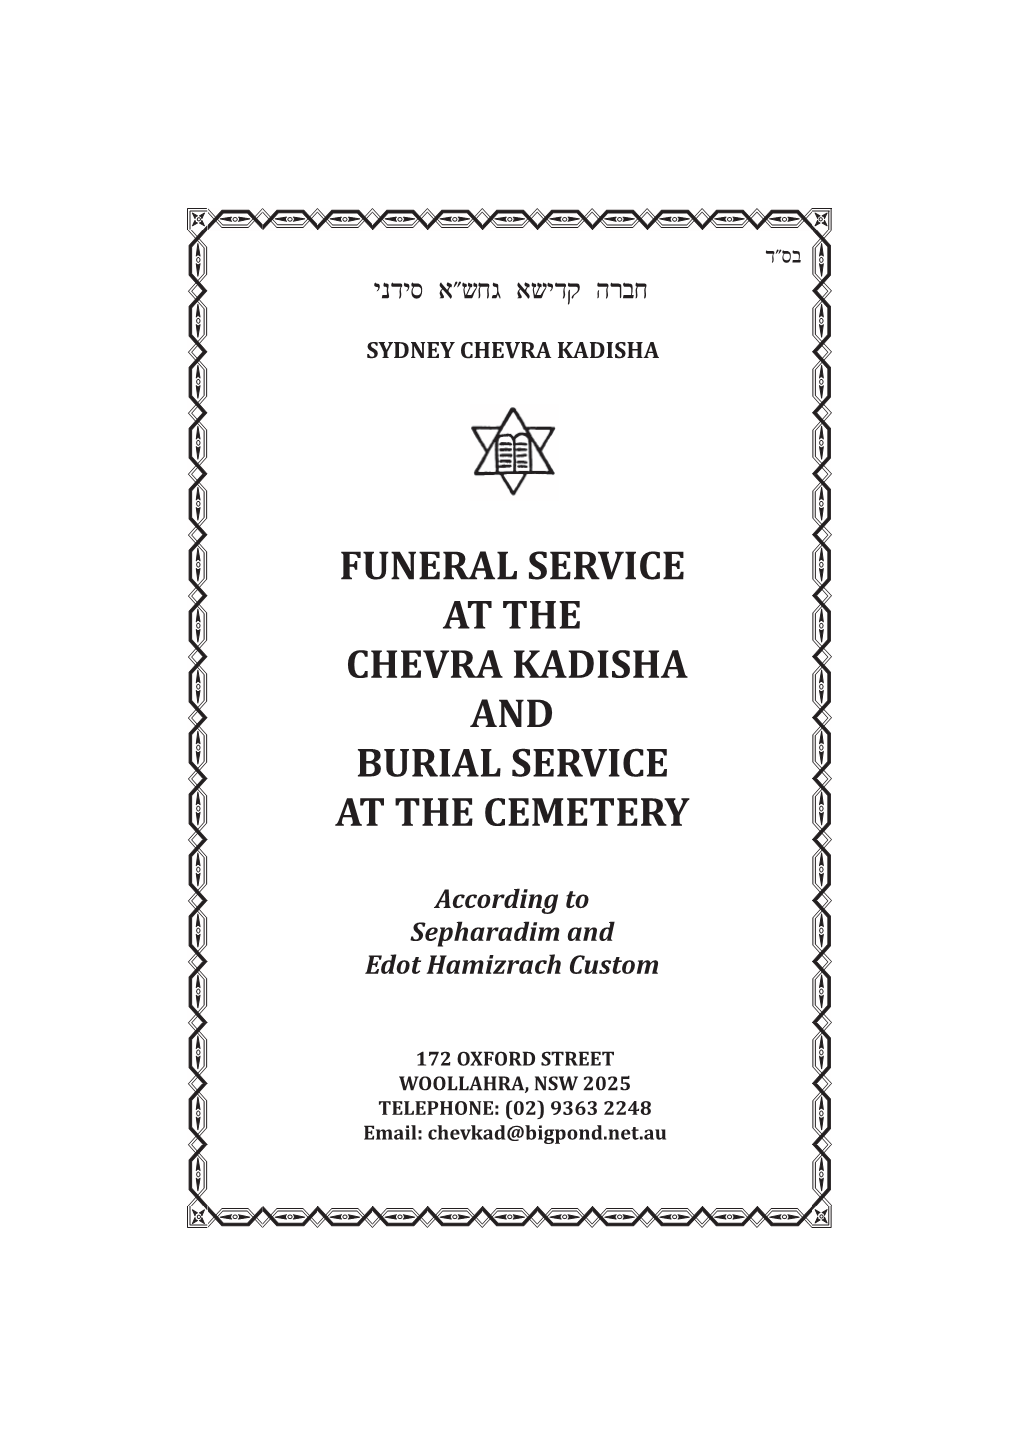 Funeral Service at the Chevra Kadisha and Burial Service at the Cemetery